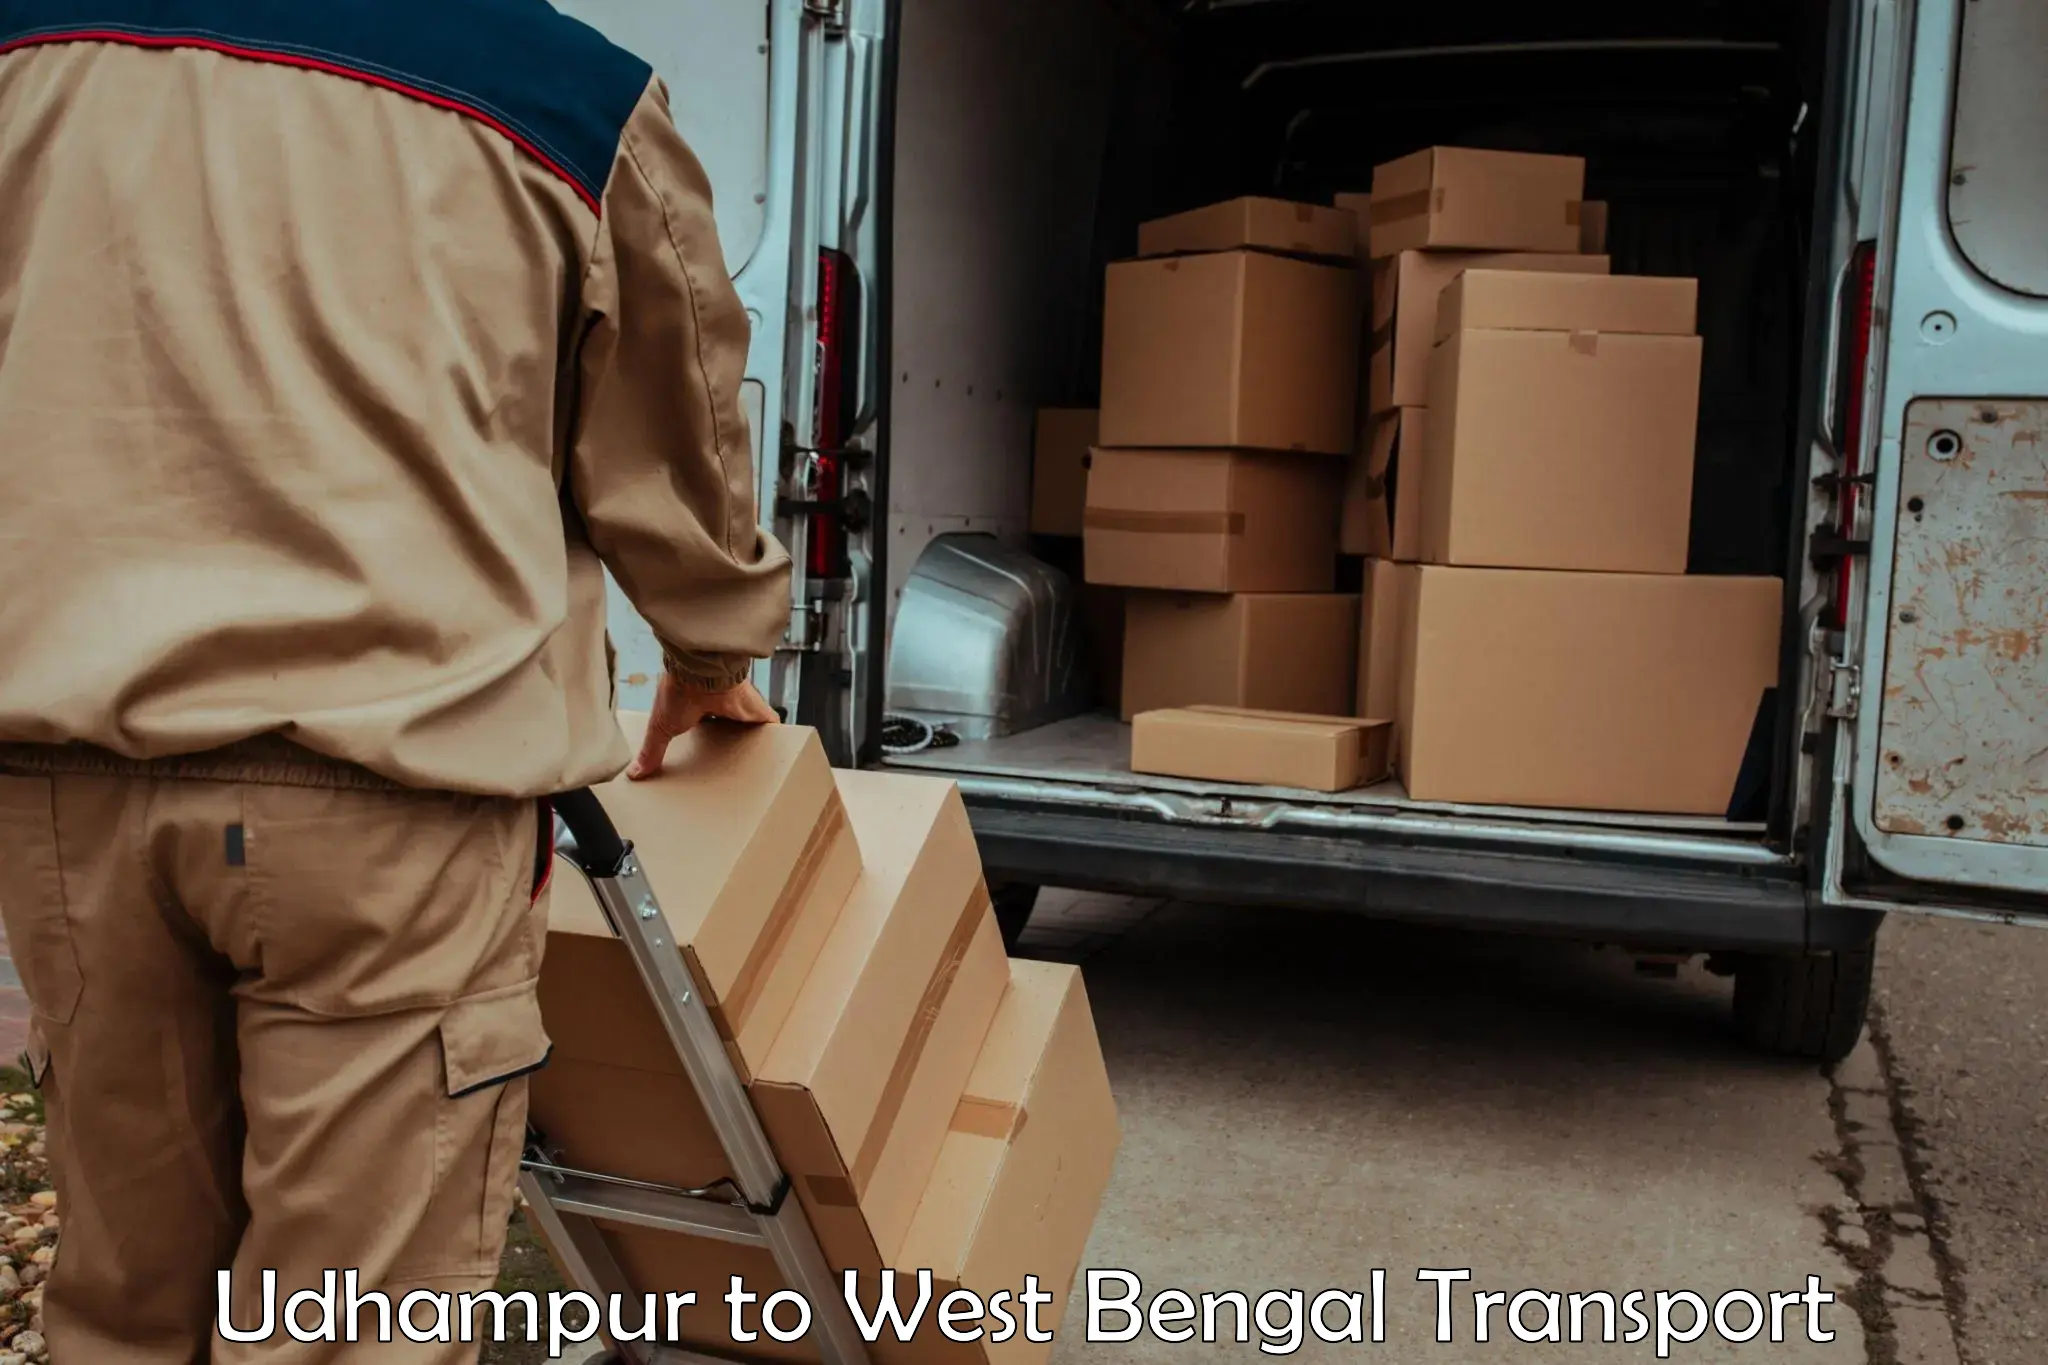 Shipping partner Udhampur to West Bengal